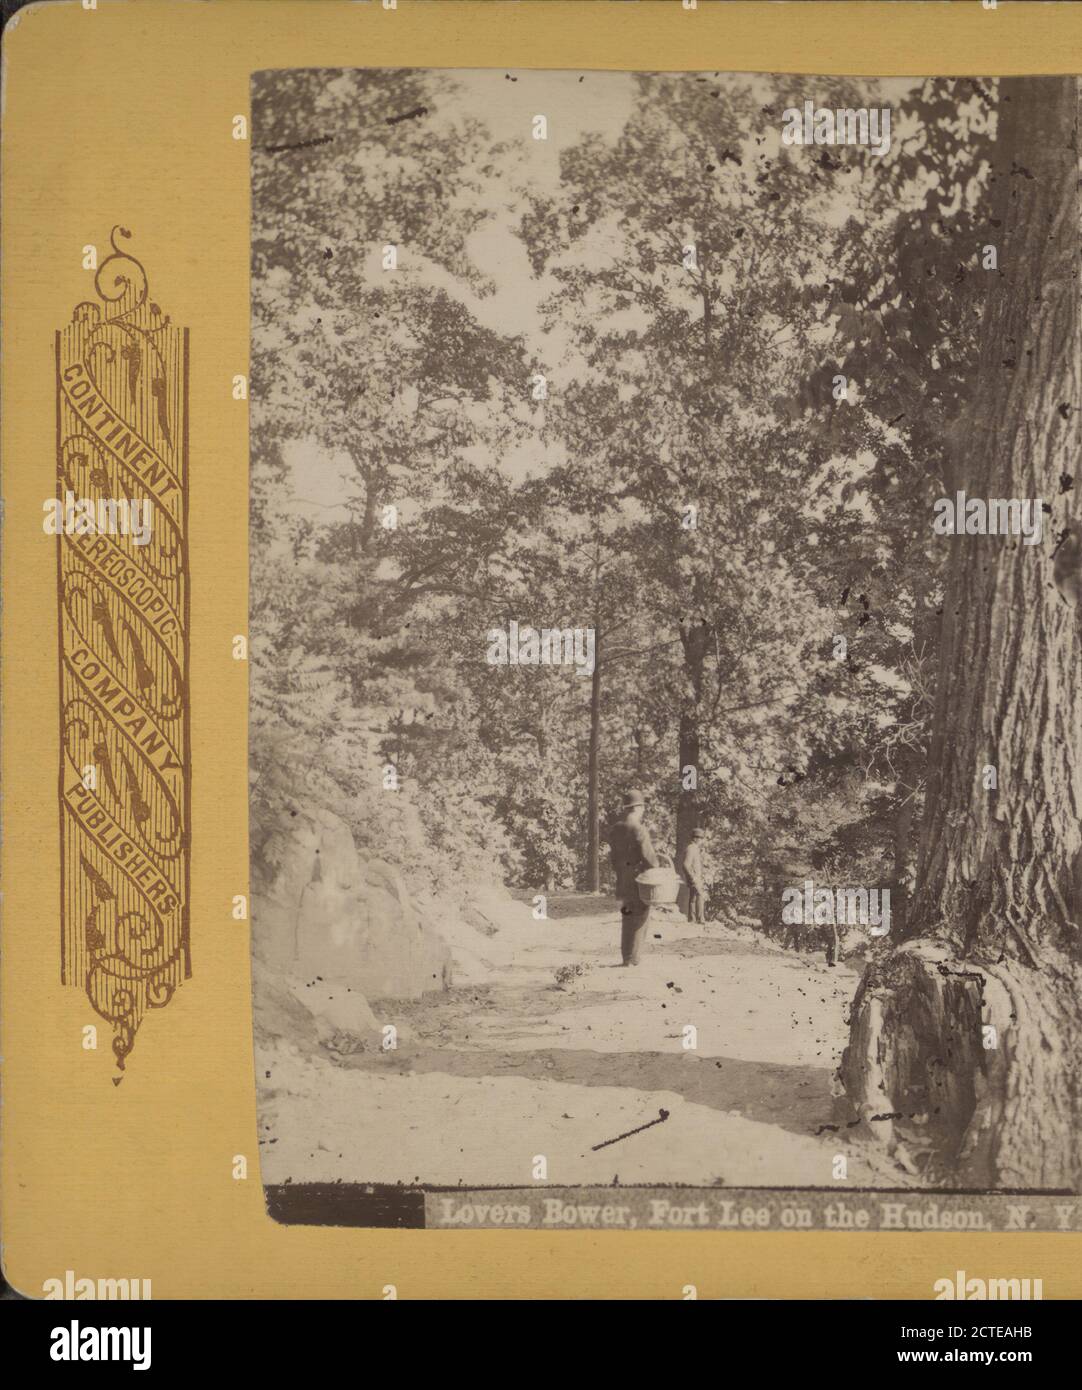 Lovers Bower, Fort Lee on the Hudson, N.Y., Continent Stereoscopic Company, Cliffs, Trails & Paths, New York (state), Hudson River (N. Y. e N.J.), Palisades (N. J. e N. Y.), New Jersey Foto Stock